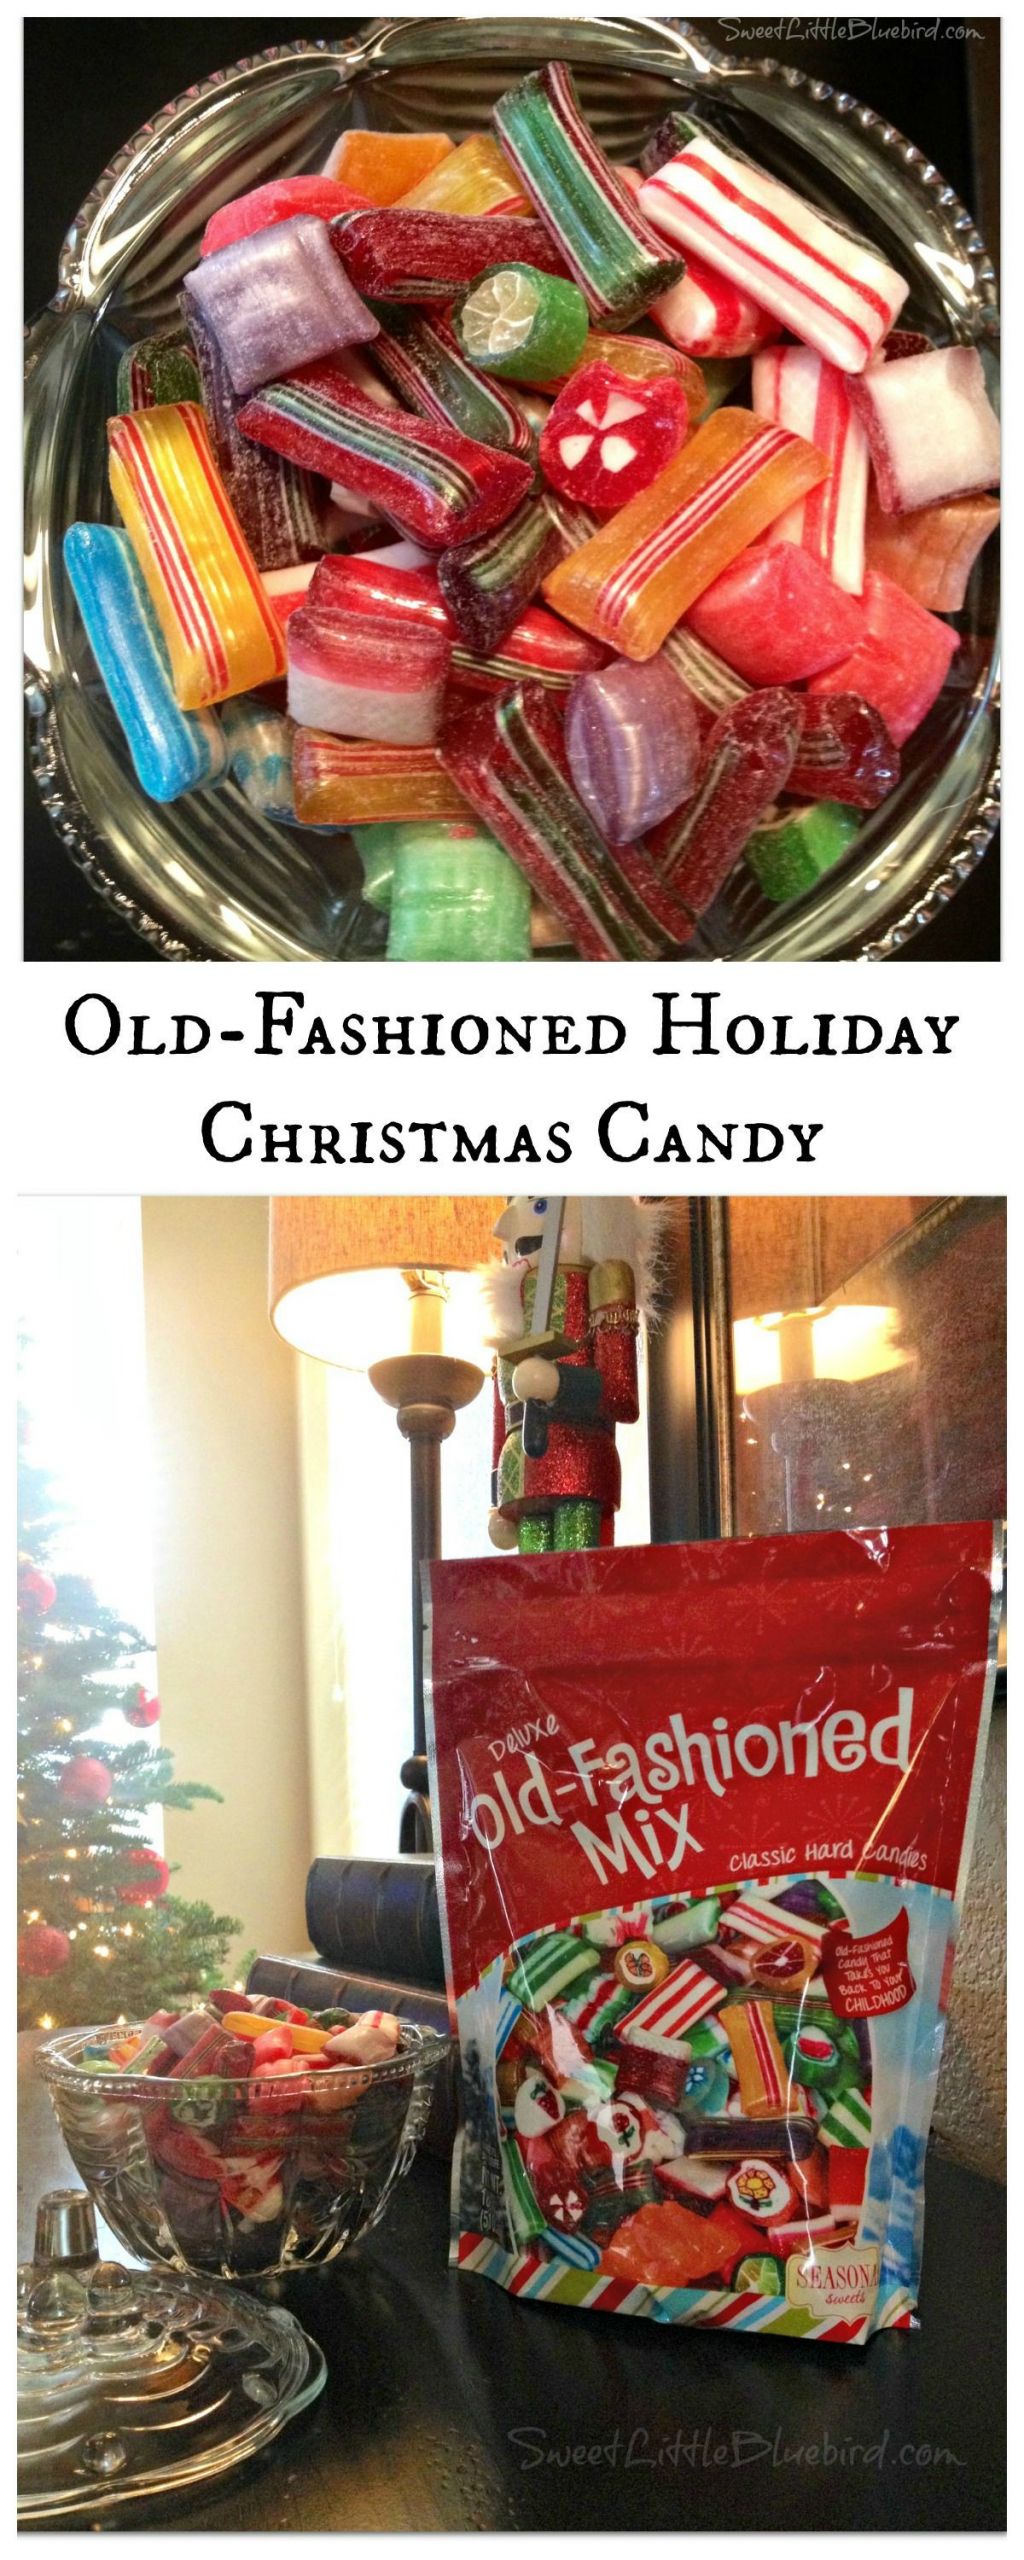 Old Fashioned Christmas Party Ideas
 Old Fashioned Holiday Christmas Candy